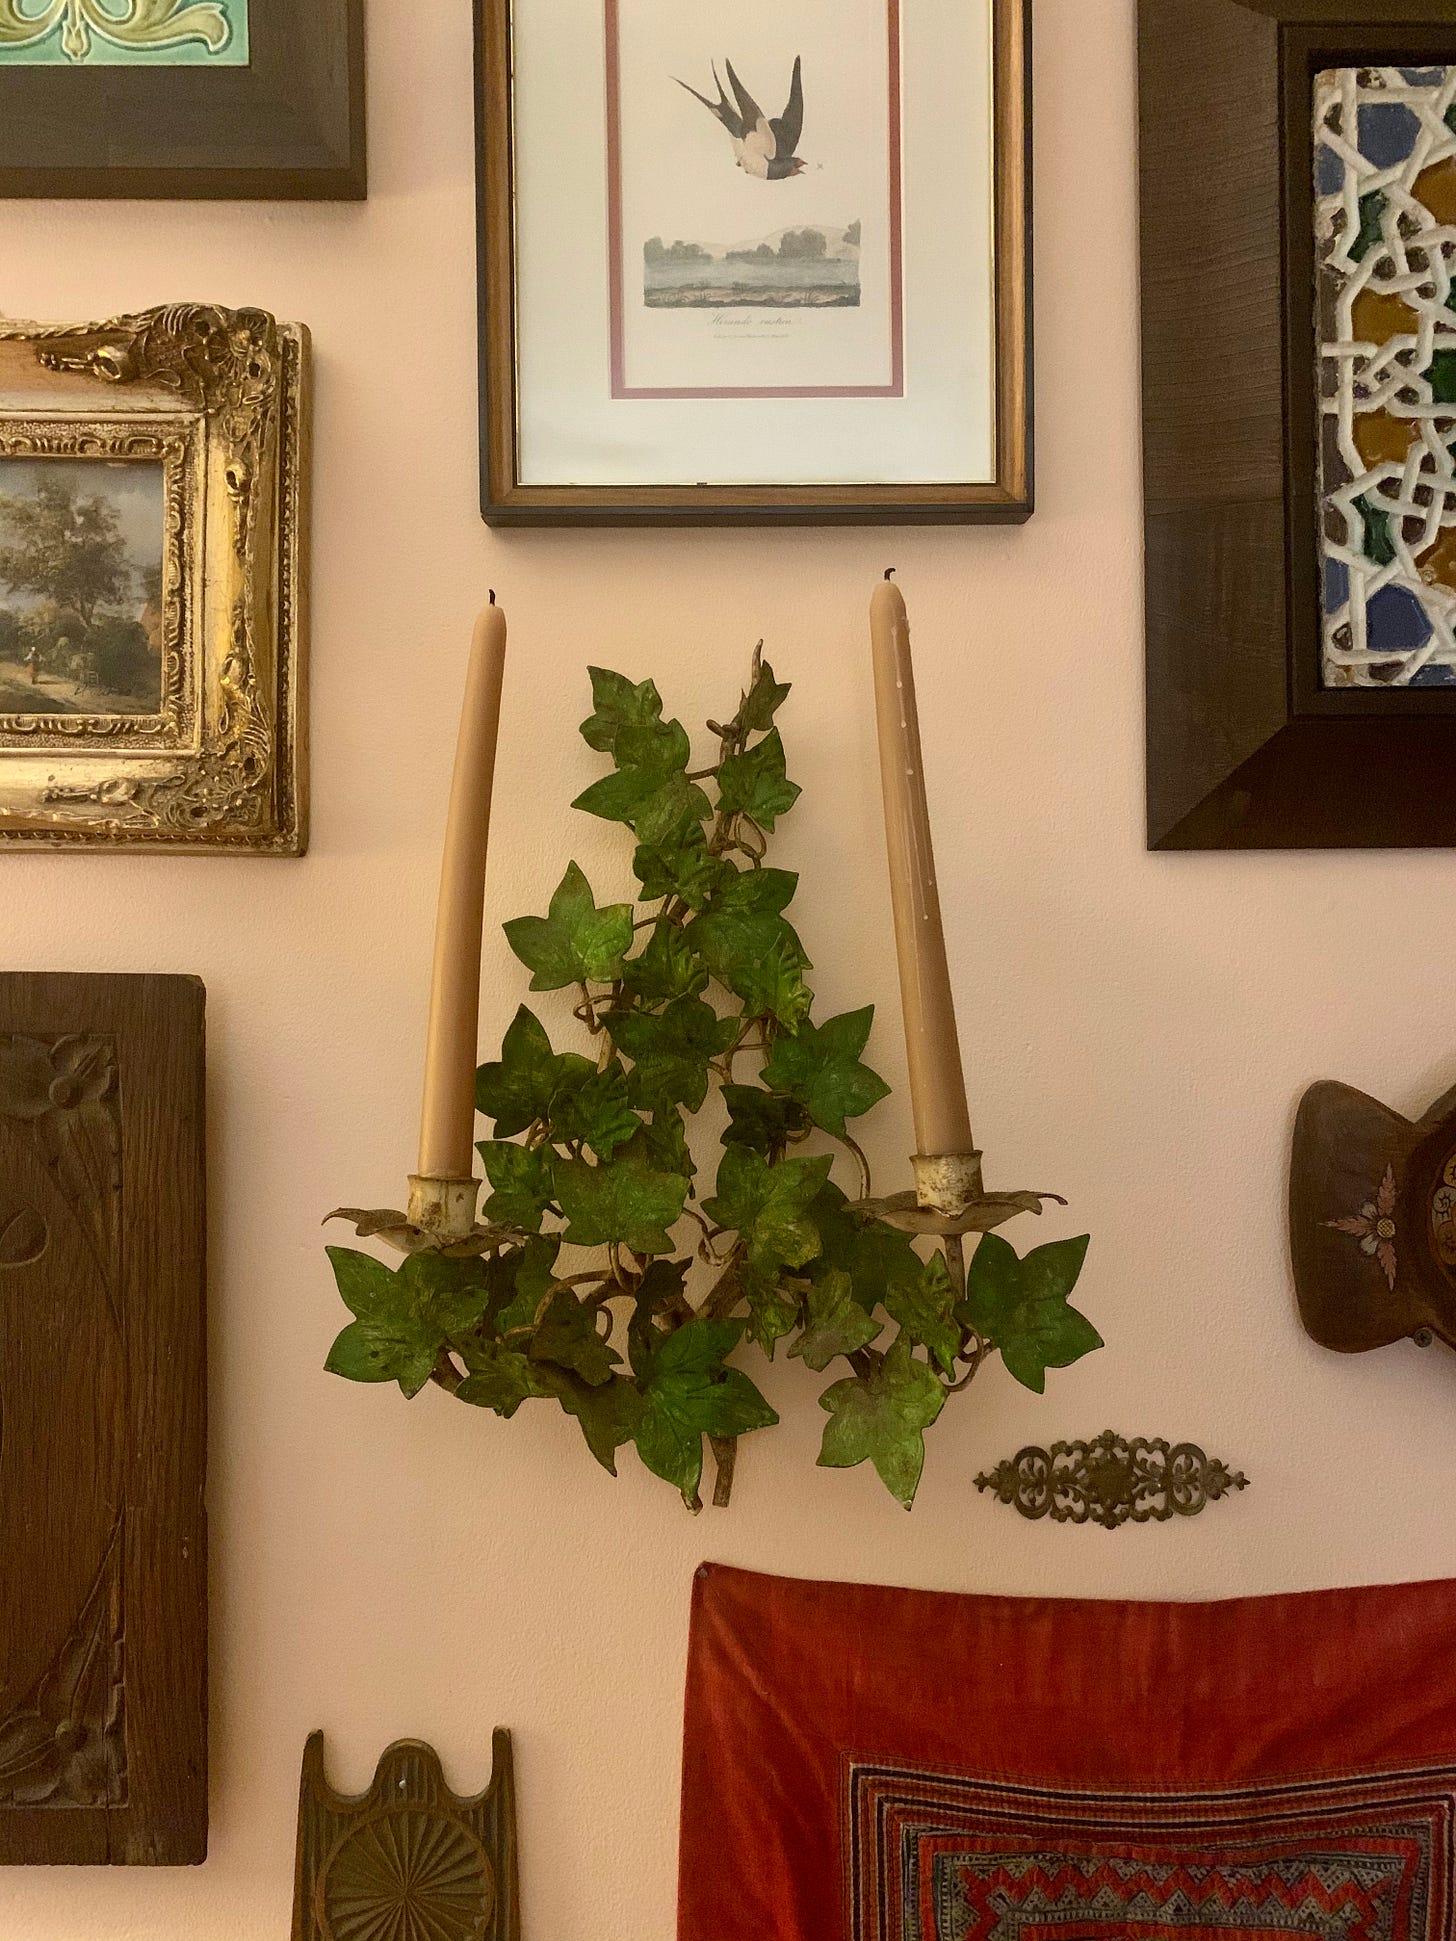 Two candles on a toleware sconce with ivy leaves